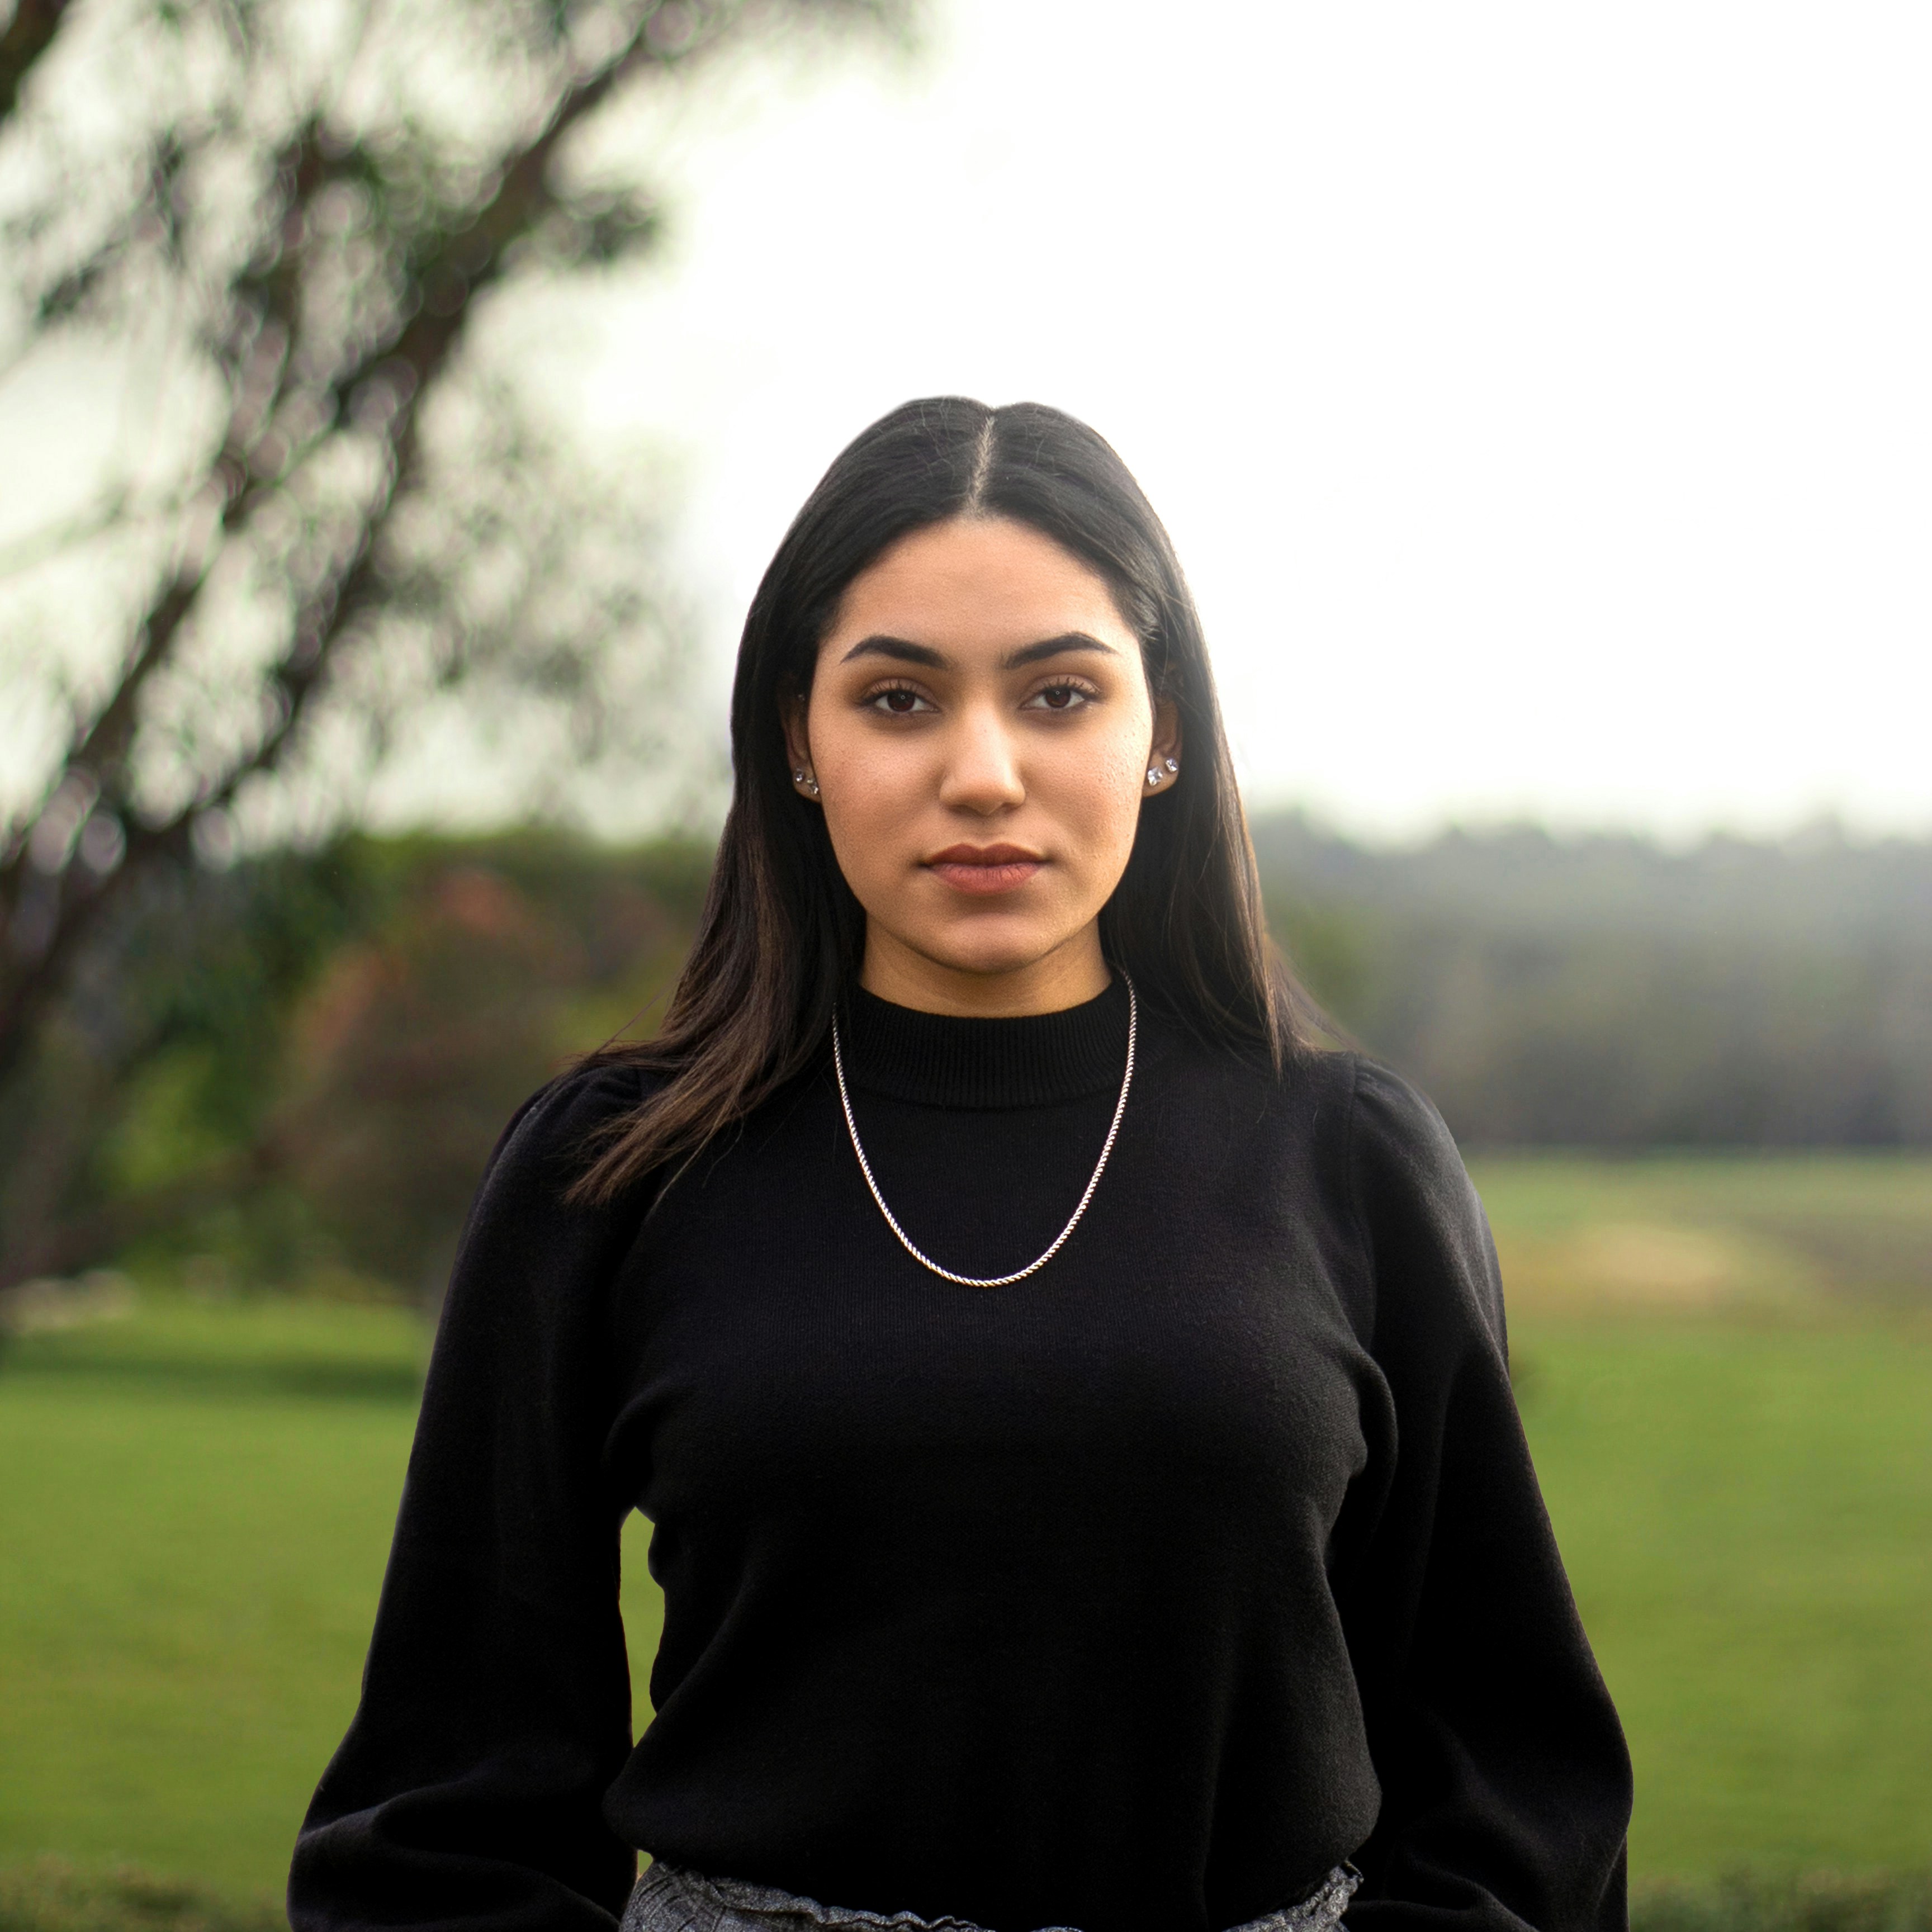 woman in black turtleneck long sleeve shirt standing on green grass field during daytime